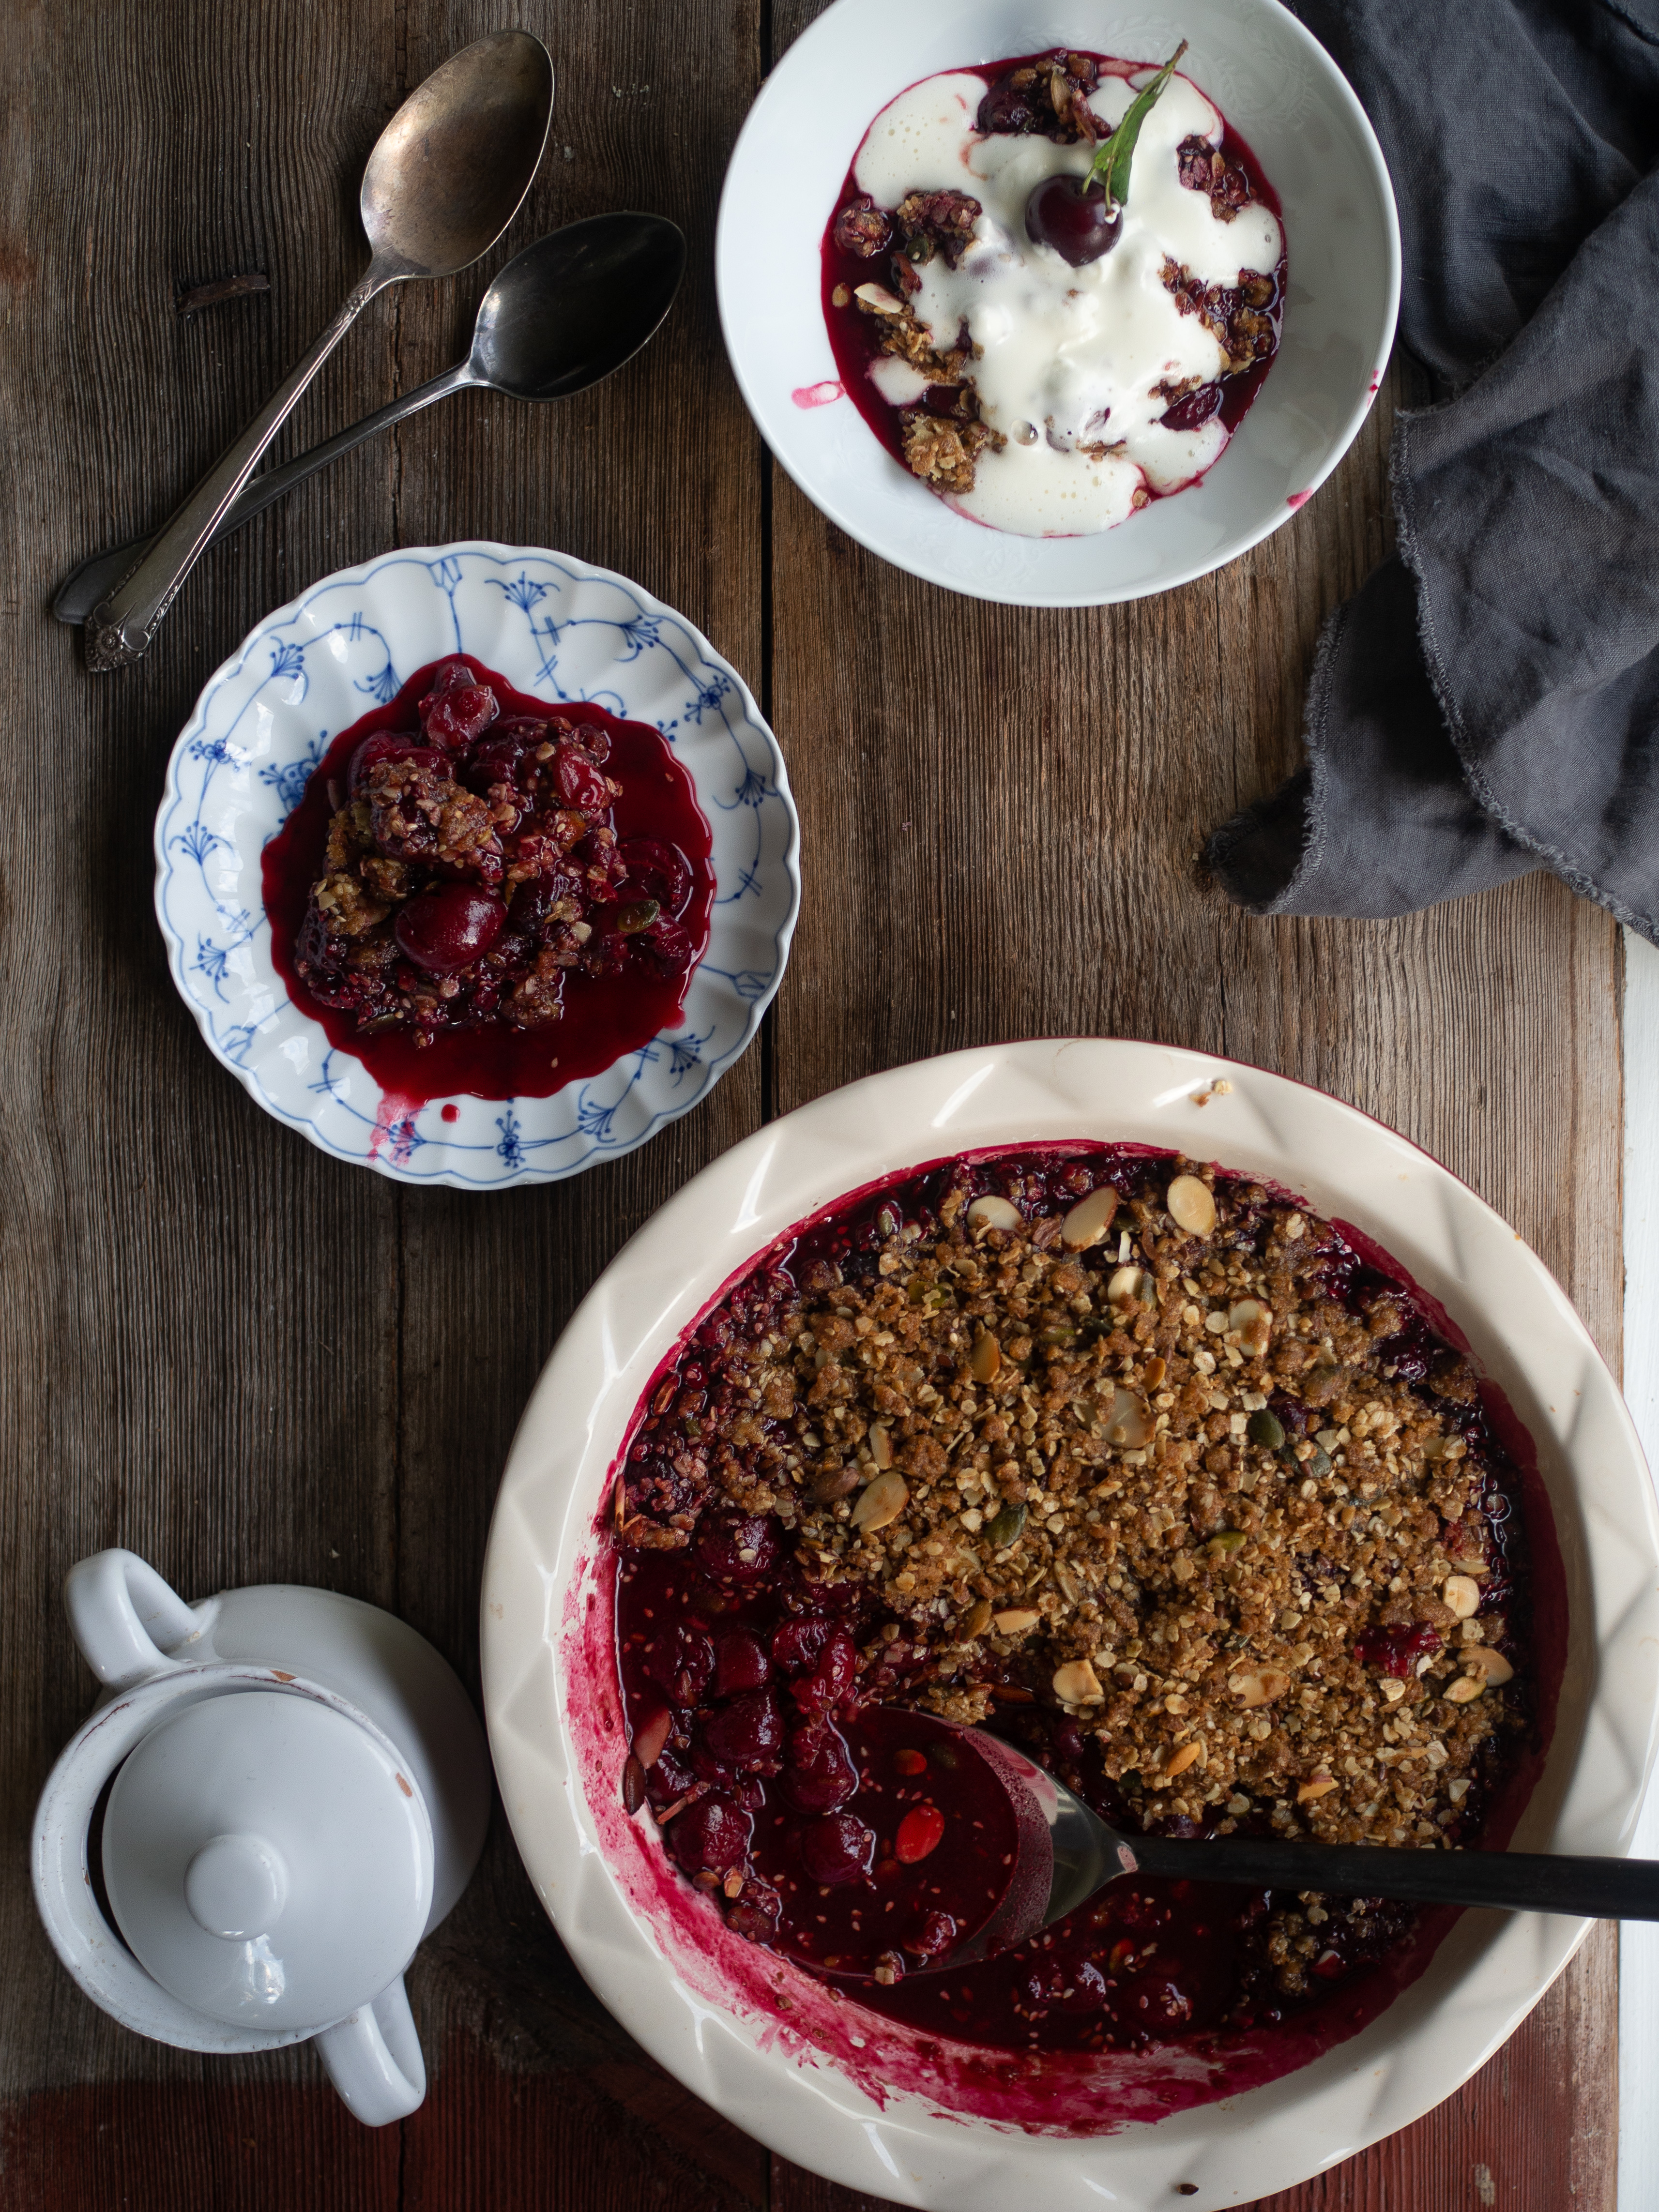 Sour Cherry Crisp with almonds and seeds (Smuldrepai med Kirsebær)